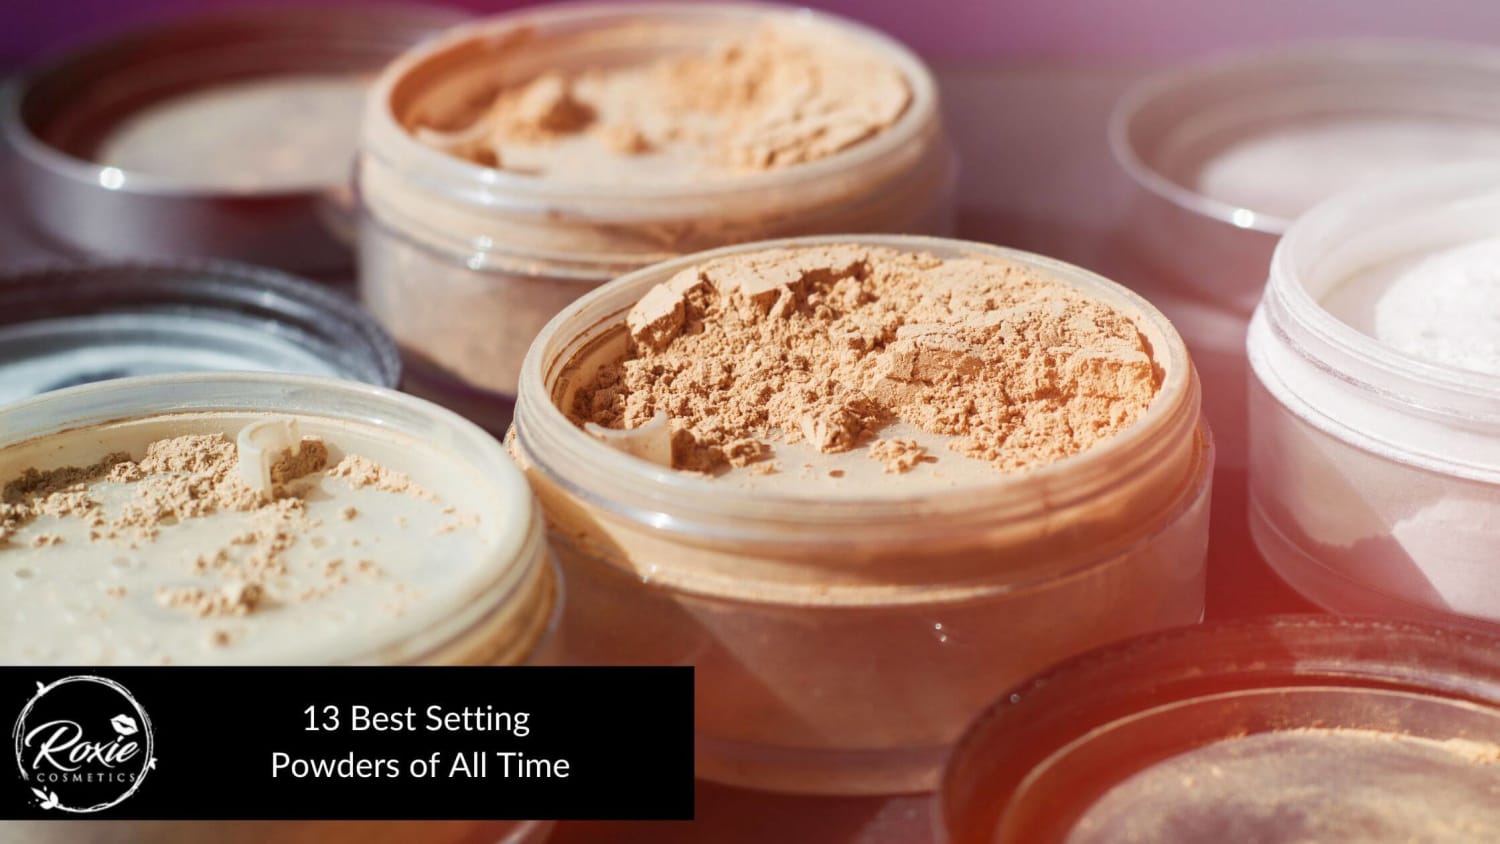 13 Best Setting Powders of All Time